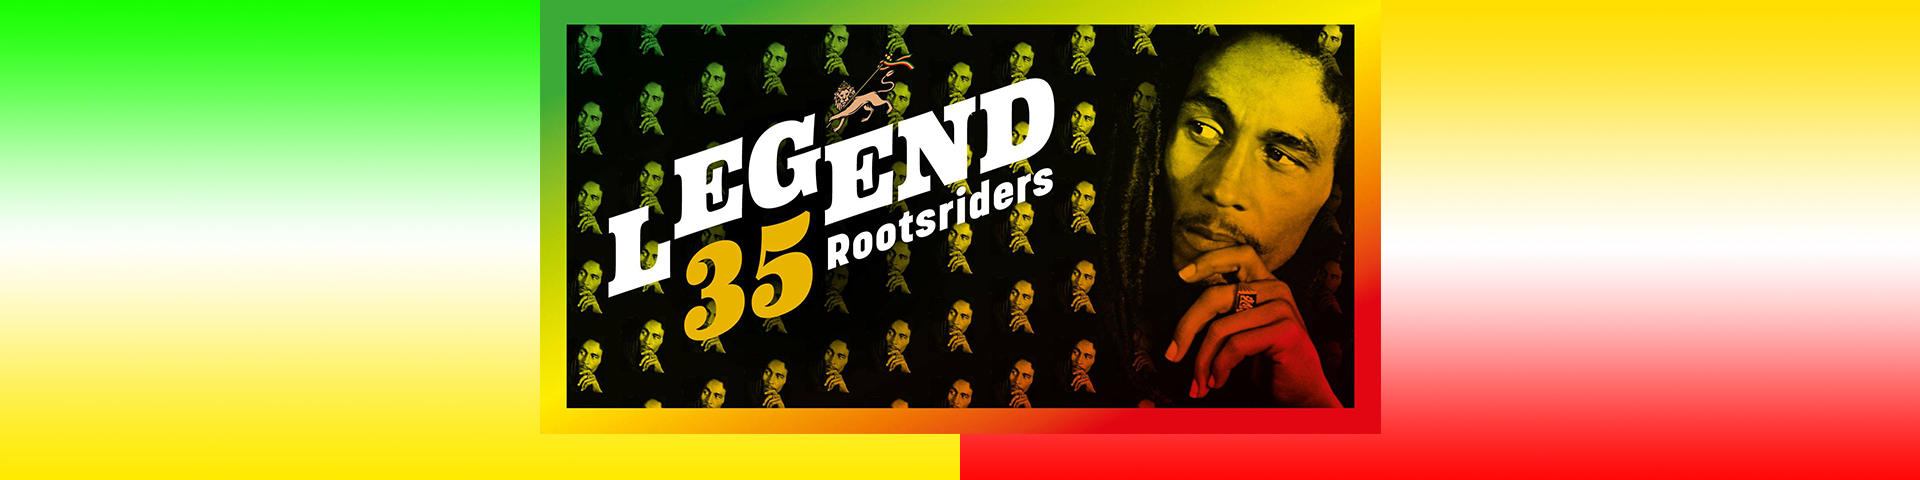 Bob Marley's Legend Tribute by Rootsriders in Luxor Live